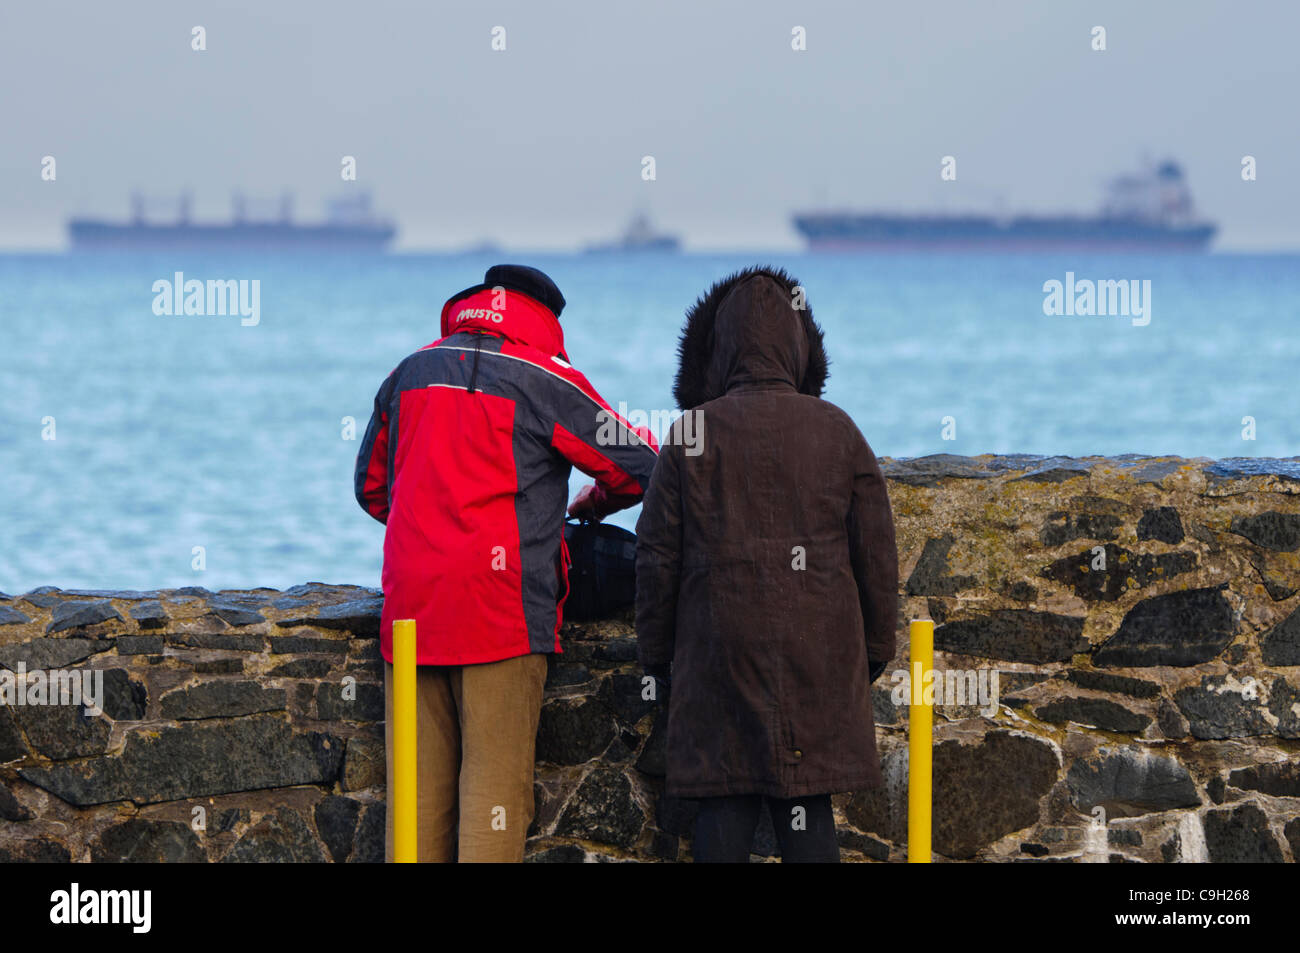 Two people watch a number of large ships and tankers out at sea Stock Photo